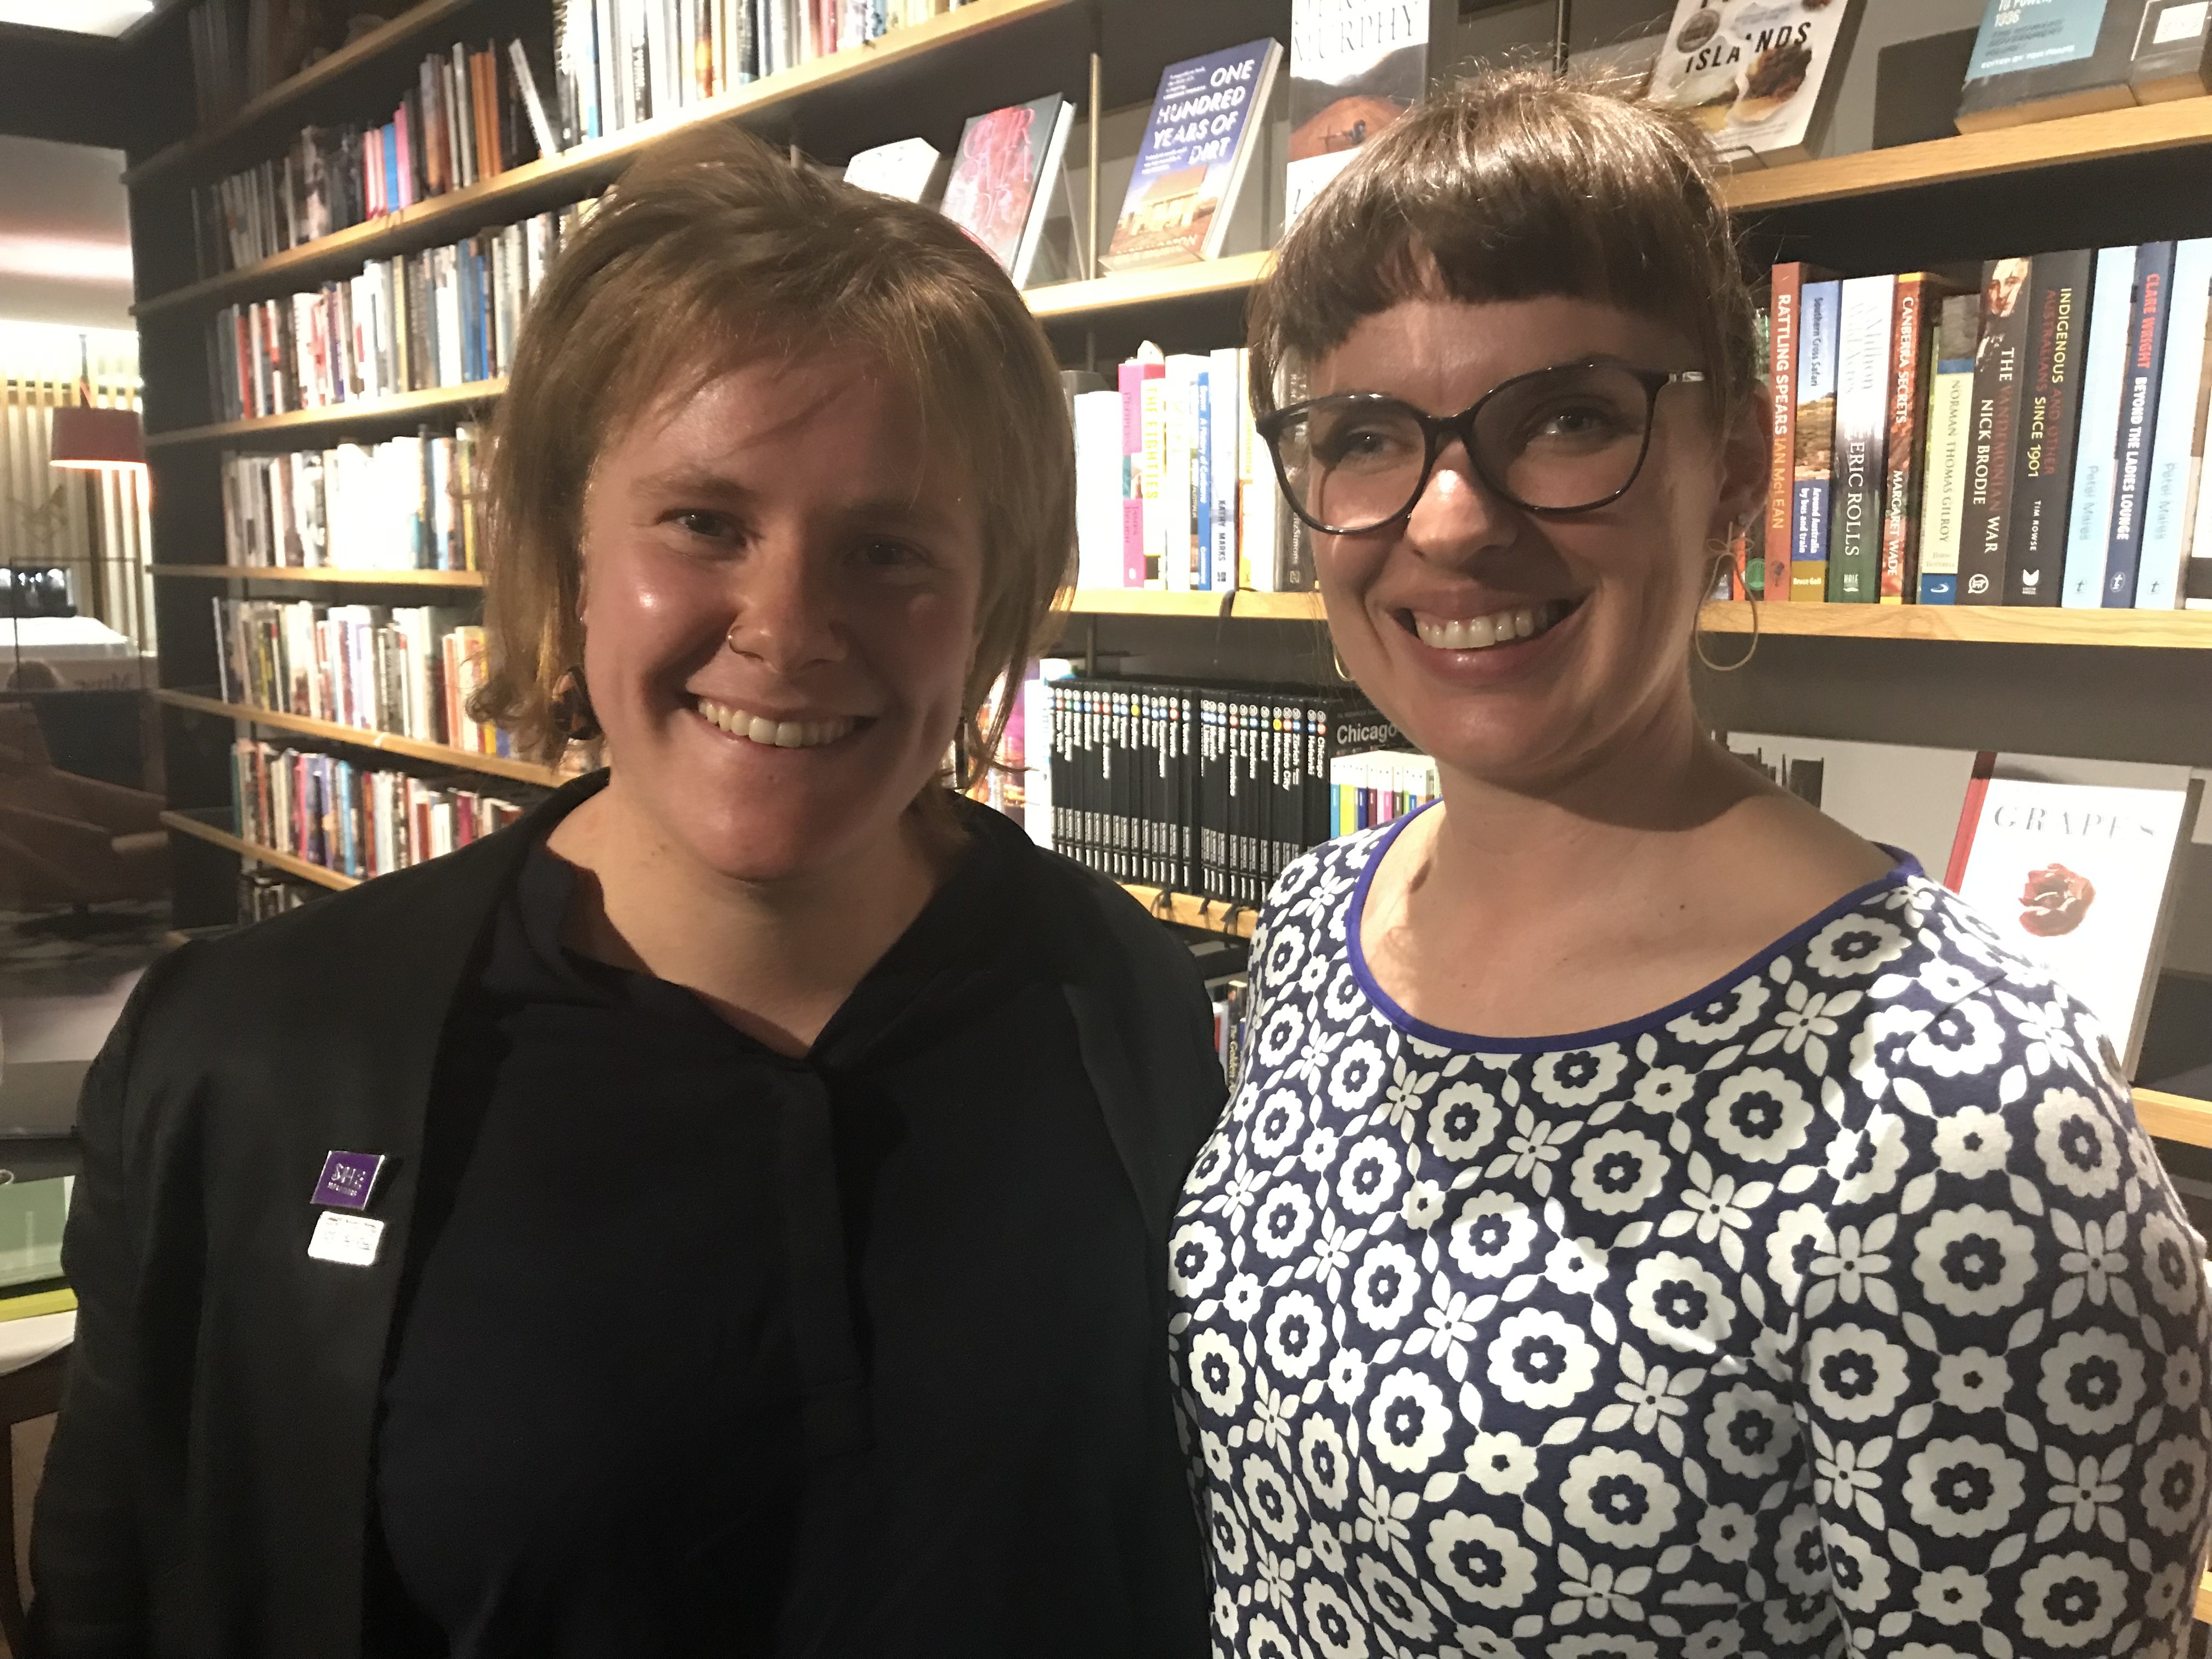 Research discovers significant barrier for local LGBTIQ+ women to access health care